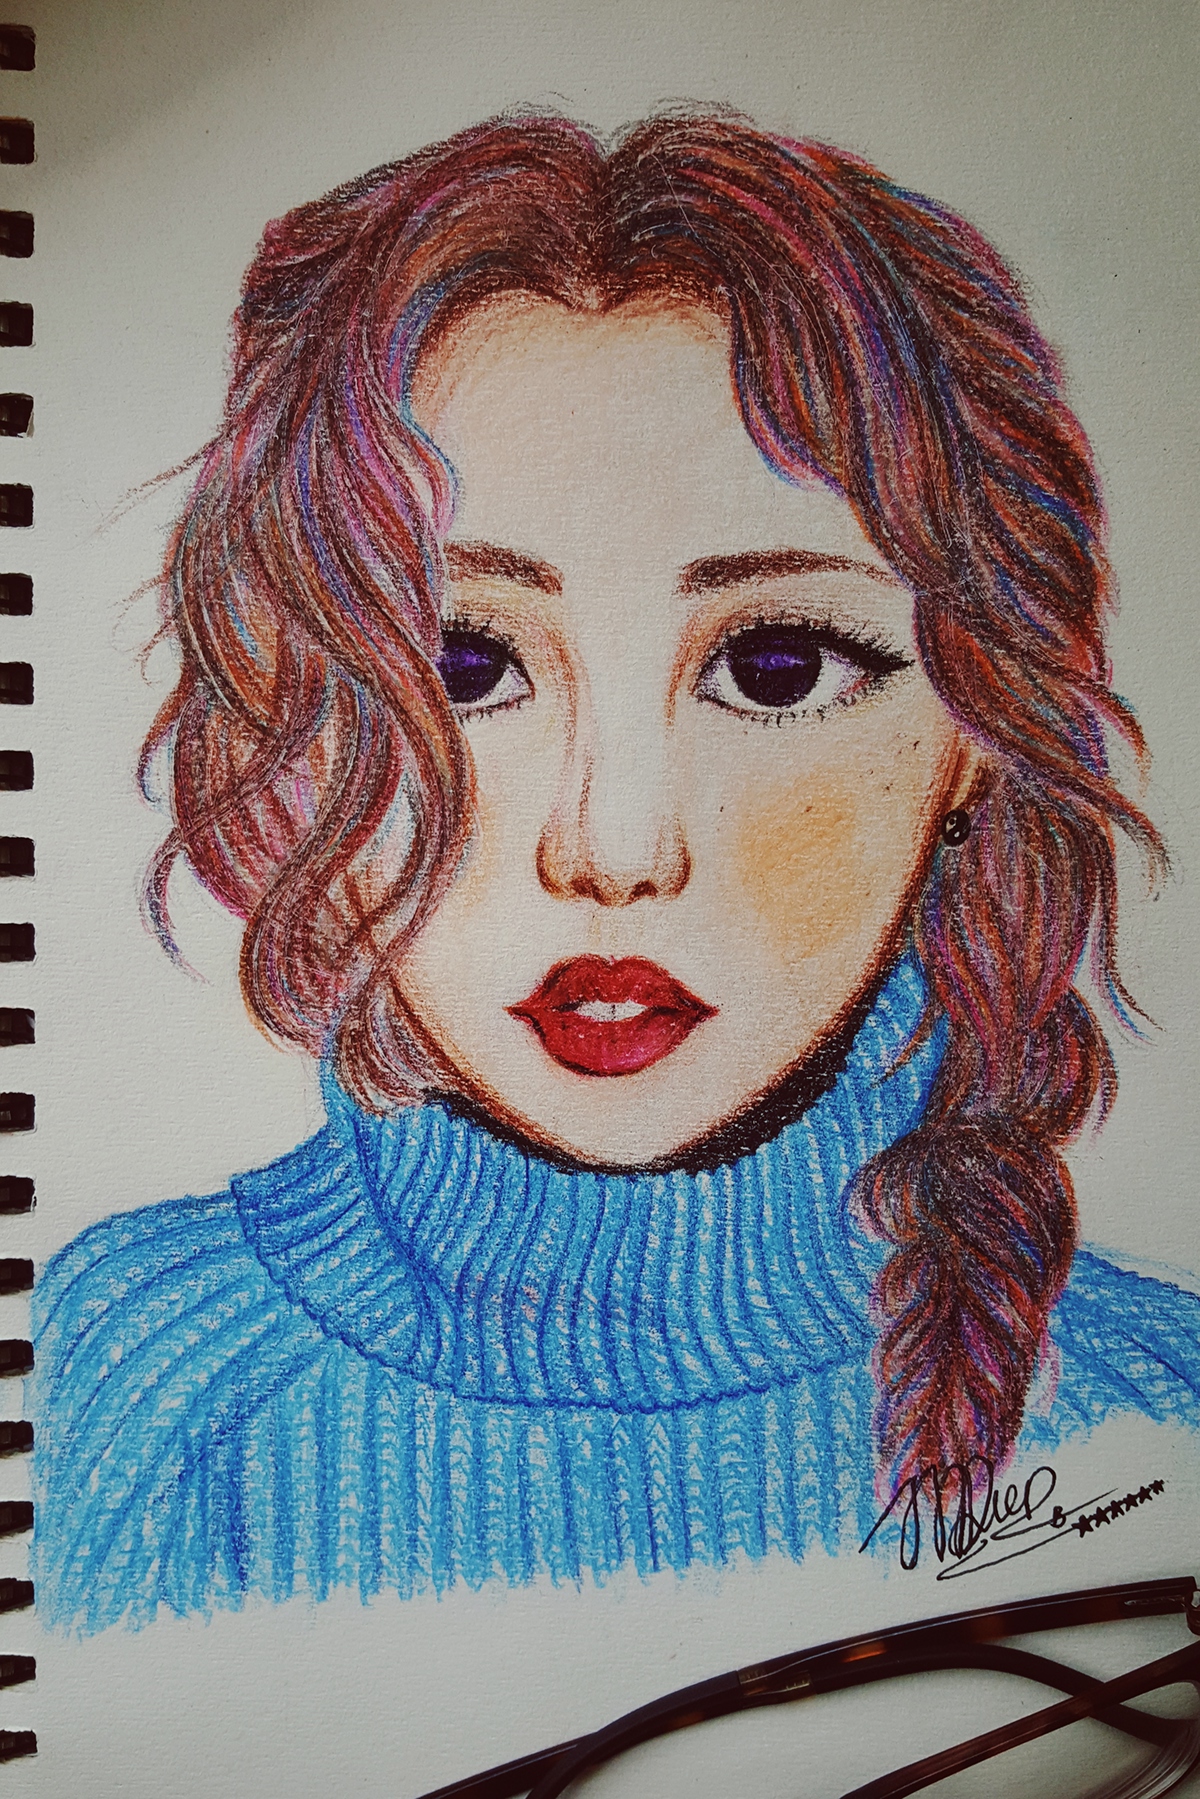 artwork pencildrawing portrait art handdrawing handdrawn sketch Freetime sketchoftheday girl ponymakeup colorful colorfulhair todayidraw